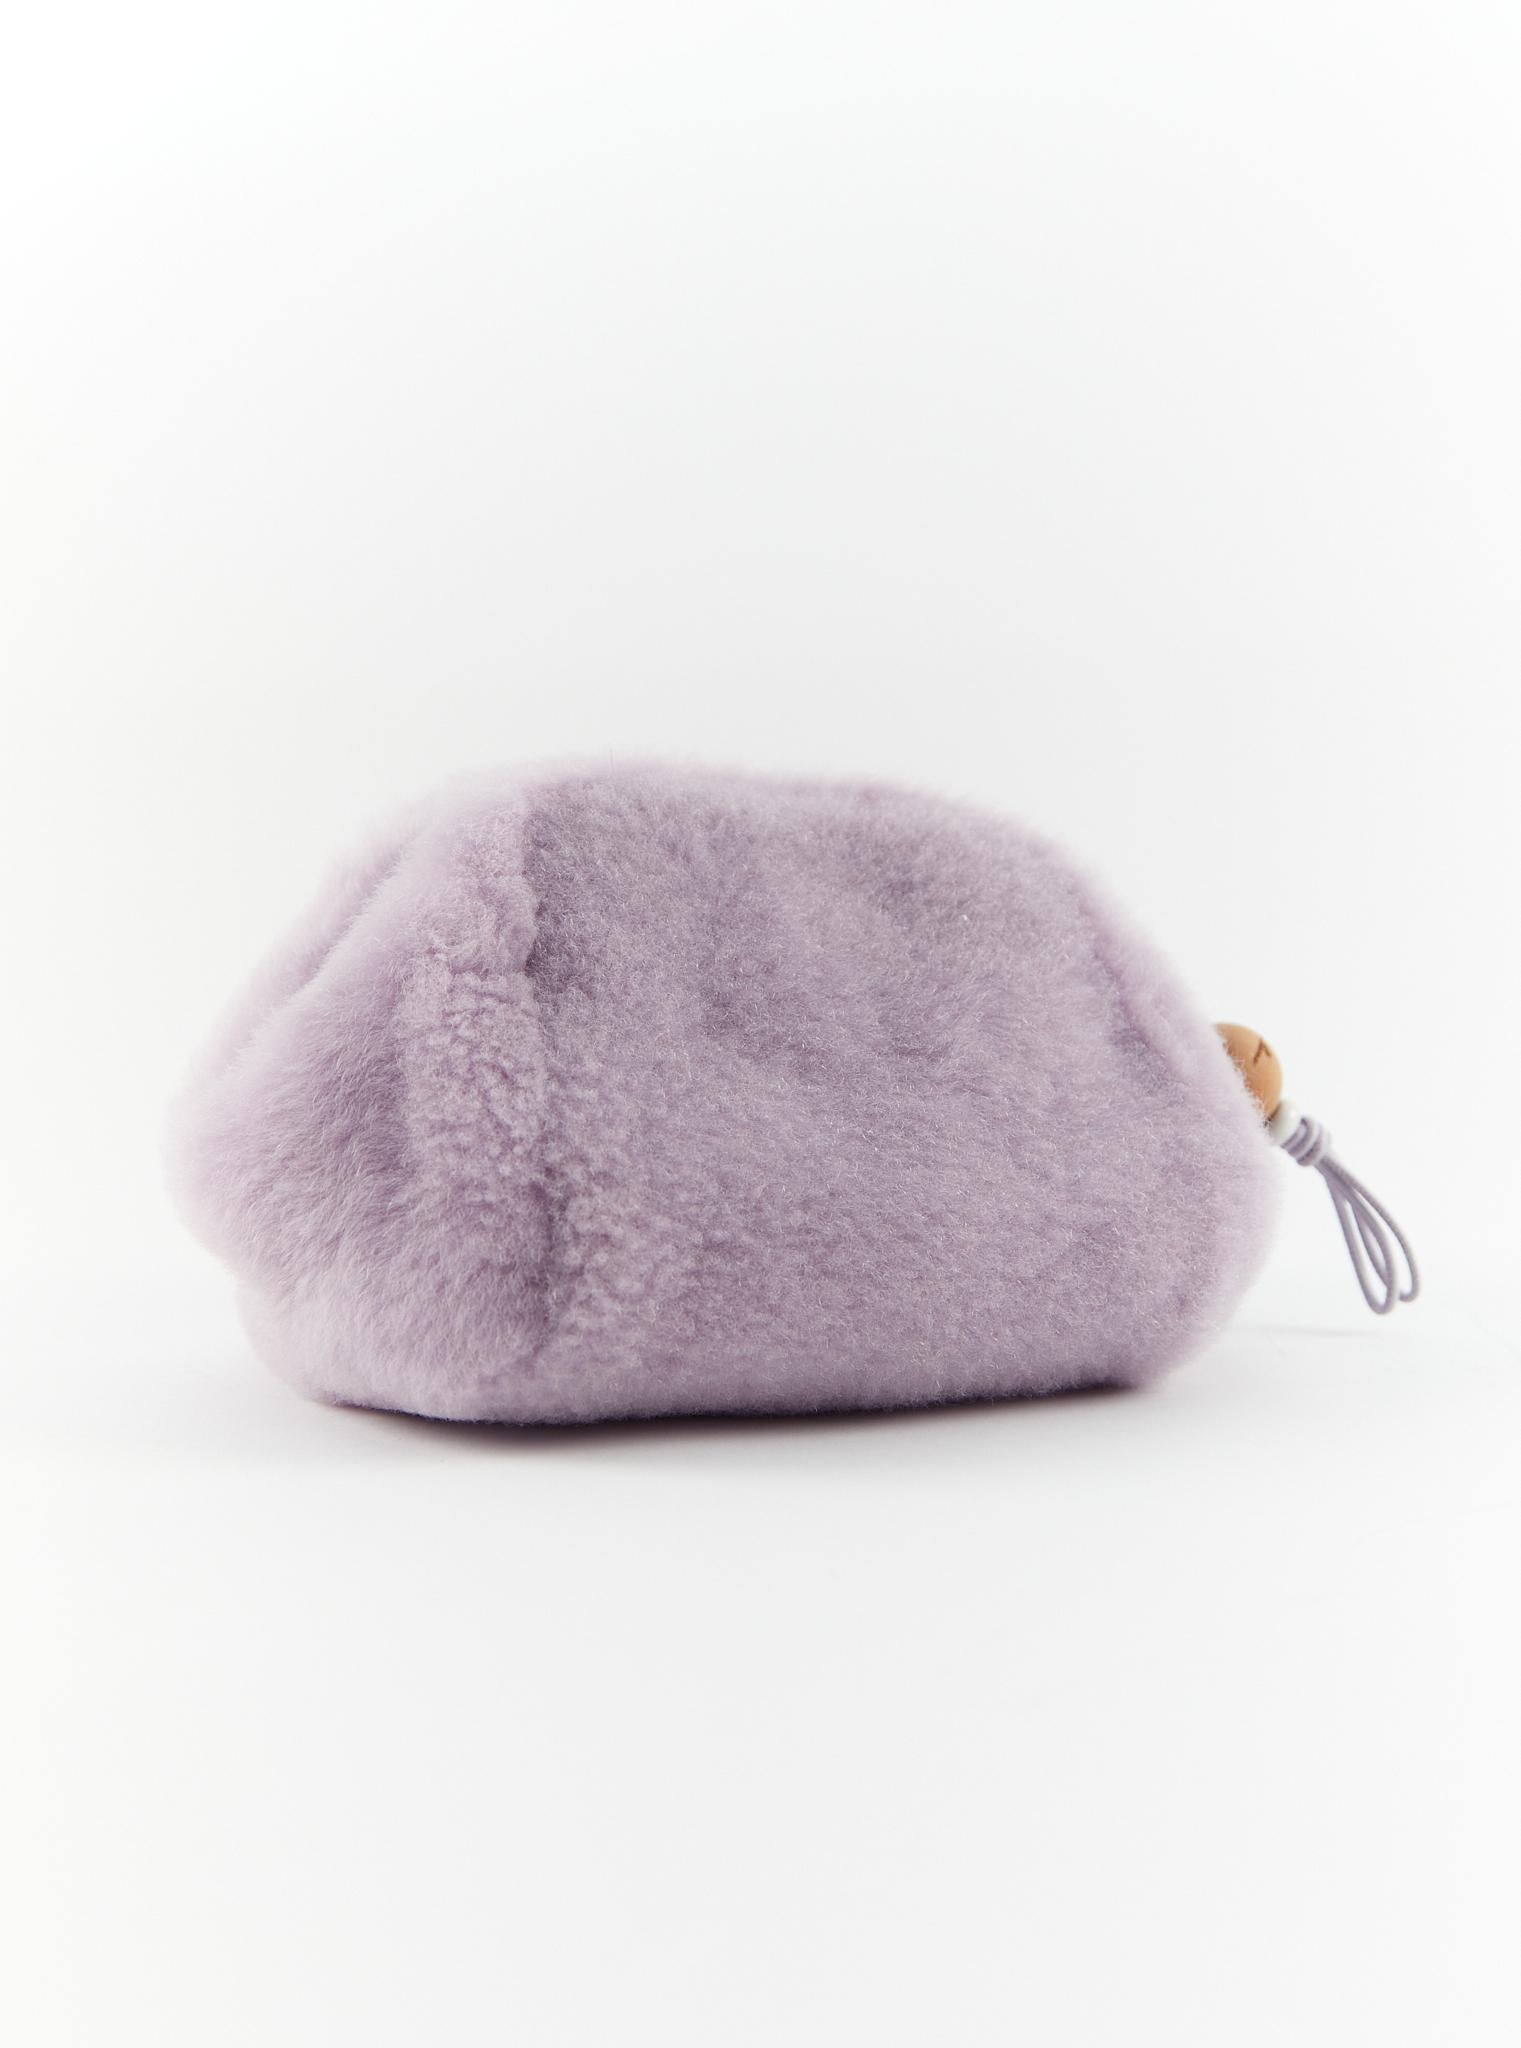 Loro Piana Shearling Clutch in Lilac

Puffy Cashmere

Accompanied by: Adjustable strap and dustbag

Dimensions: W 17 x H 14.5 x D 17.5 cm

